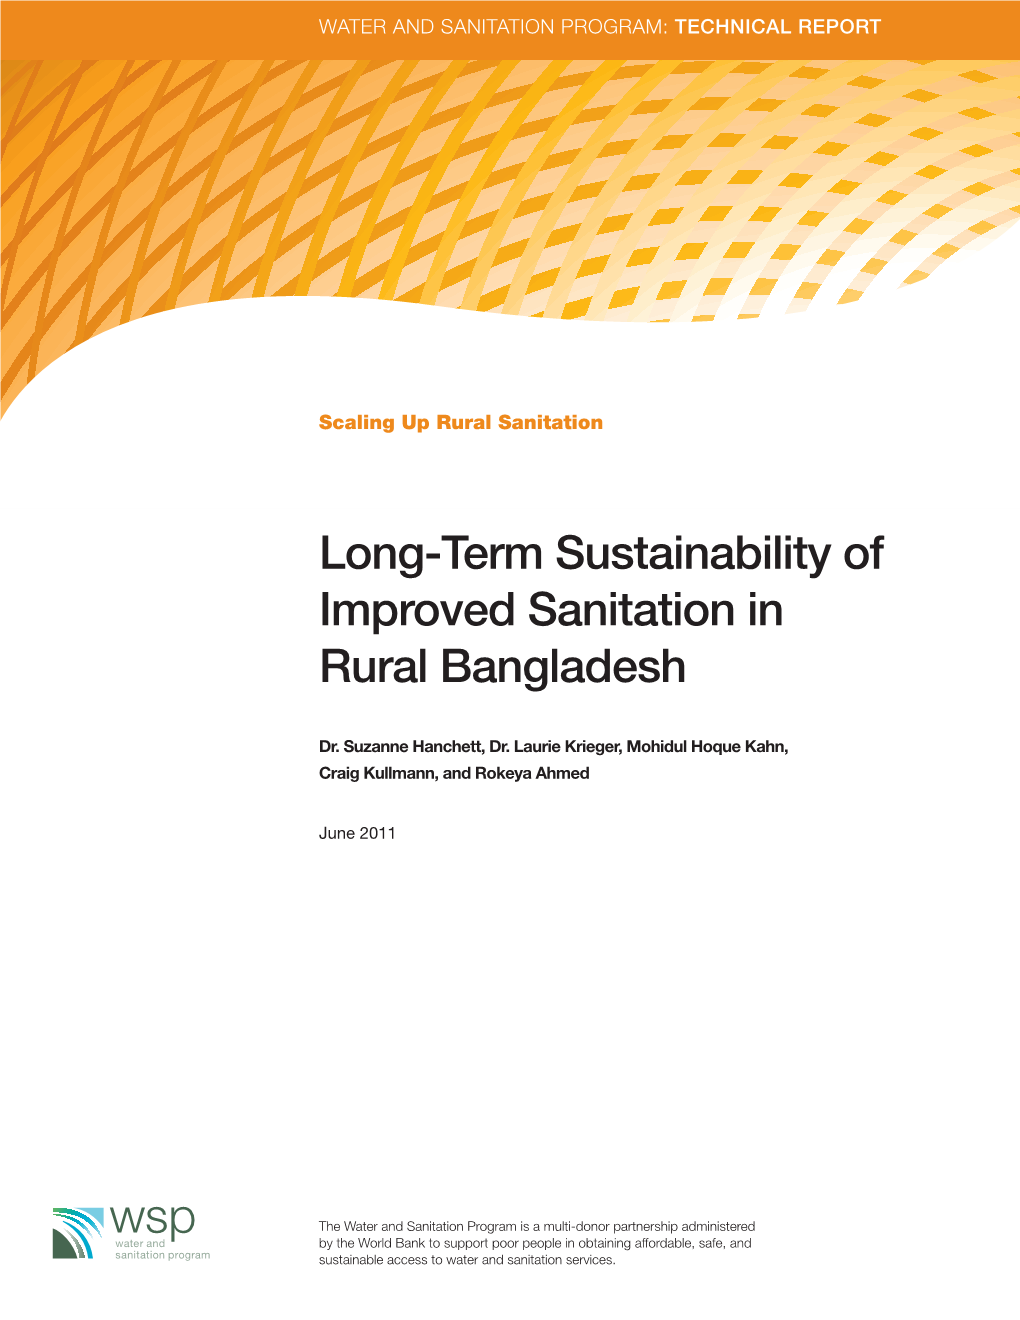 Long-Term Sustainability of Improved Sanitation in Rural Bangladesh